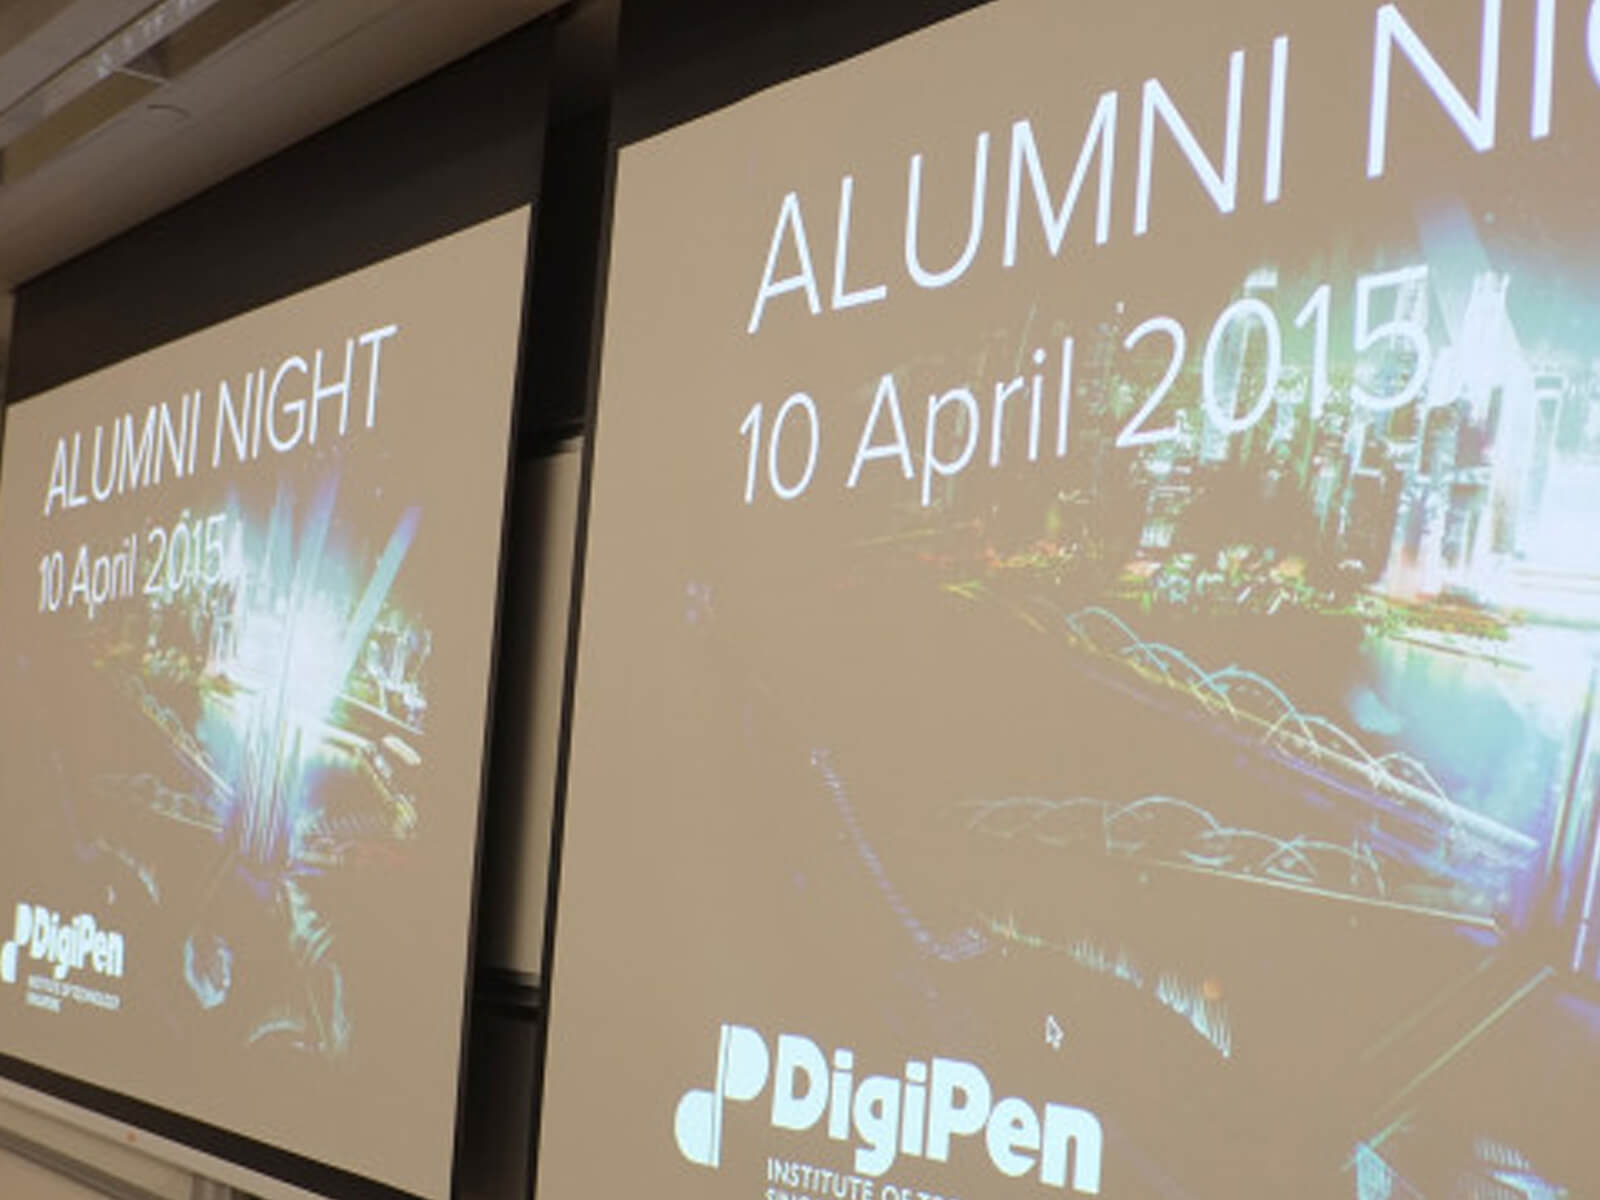 A projection screen displays "Alumni Night, 10 April 2015" and a graphic of a shining futuristic city